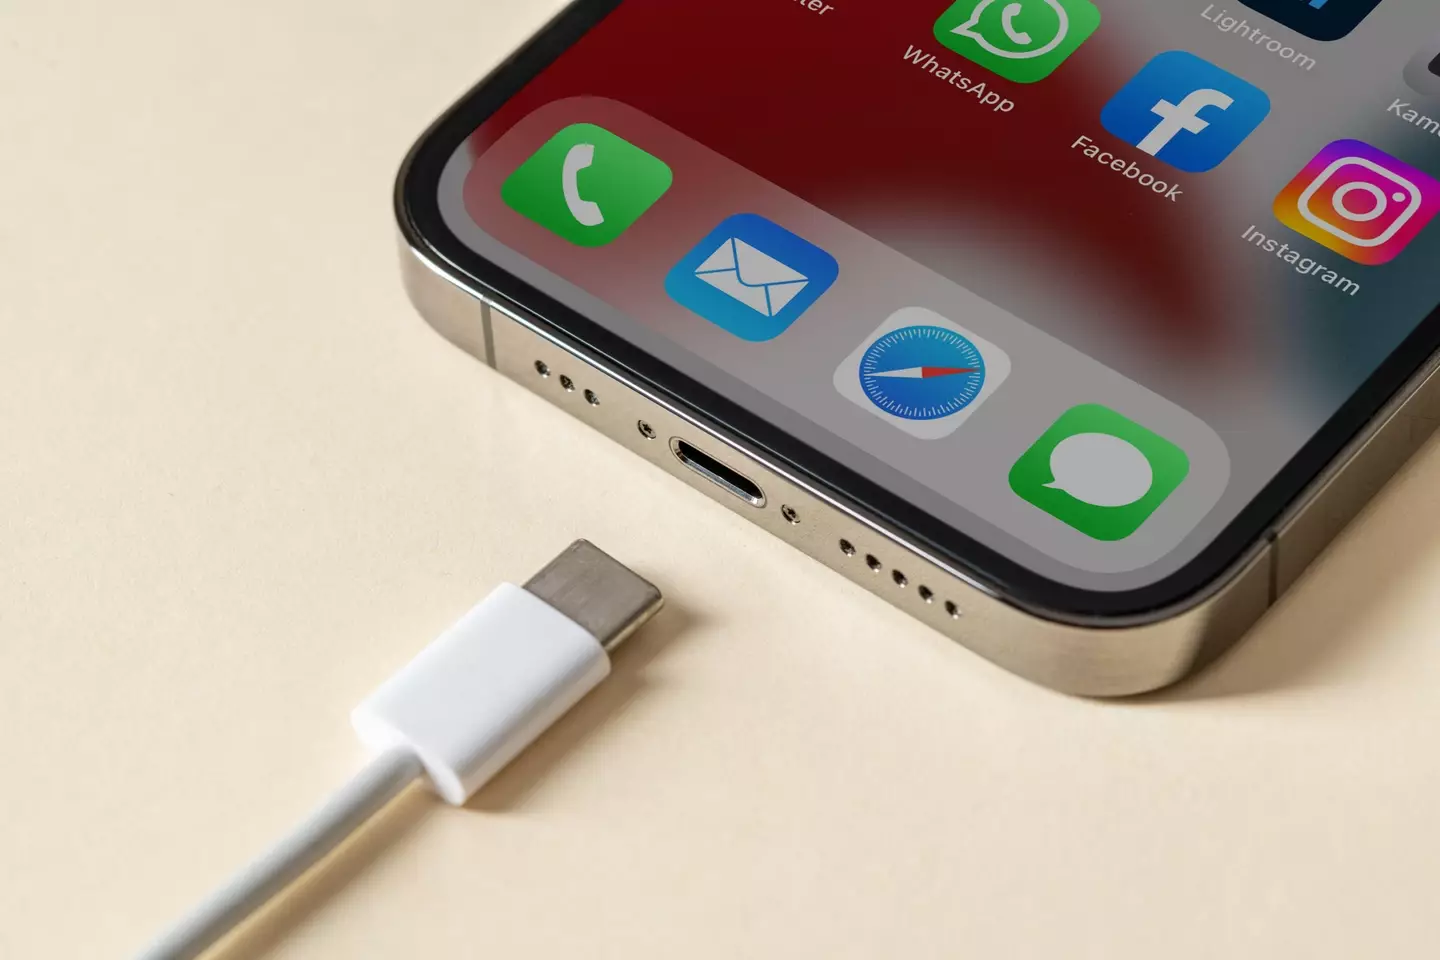 Apple and the EU have been in disagreement about how to improve charging cables for over 10 years according to Joswiak.